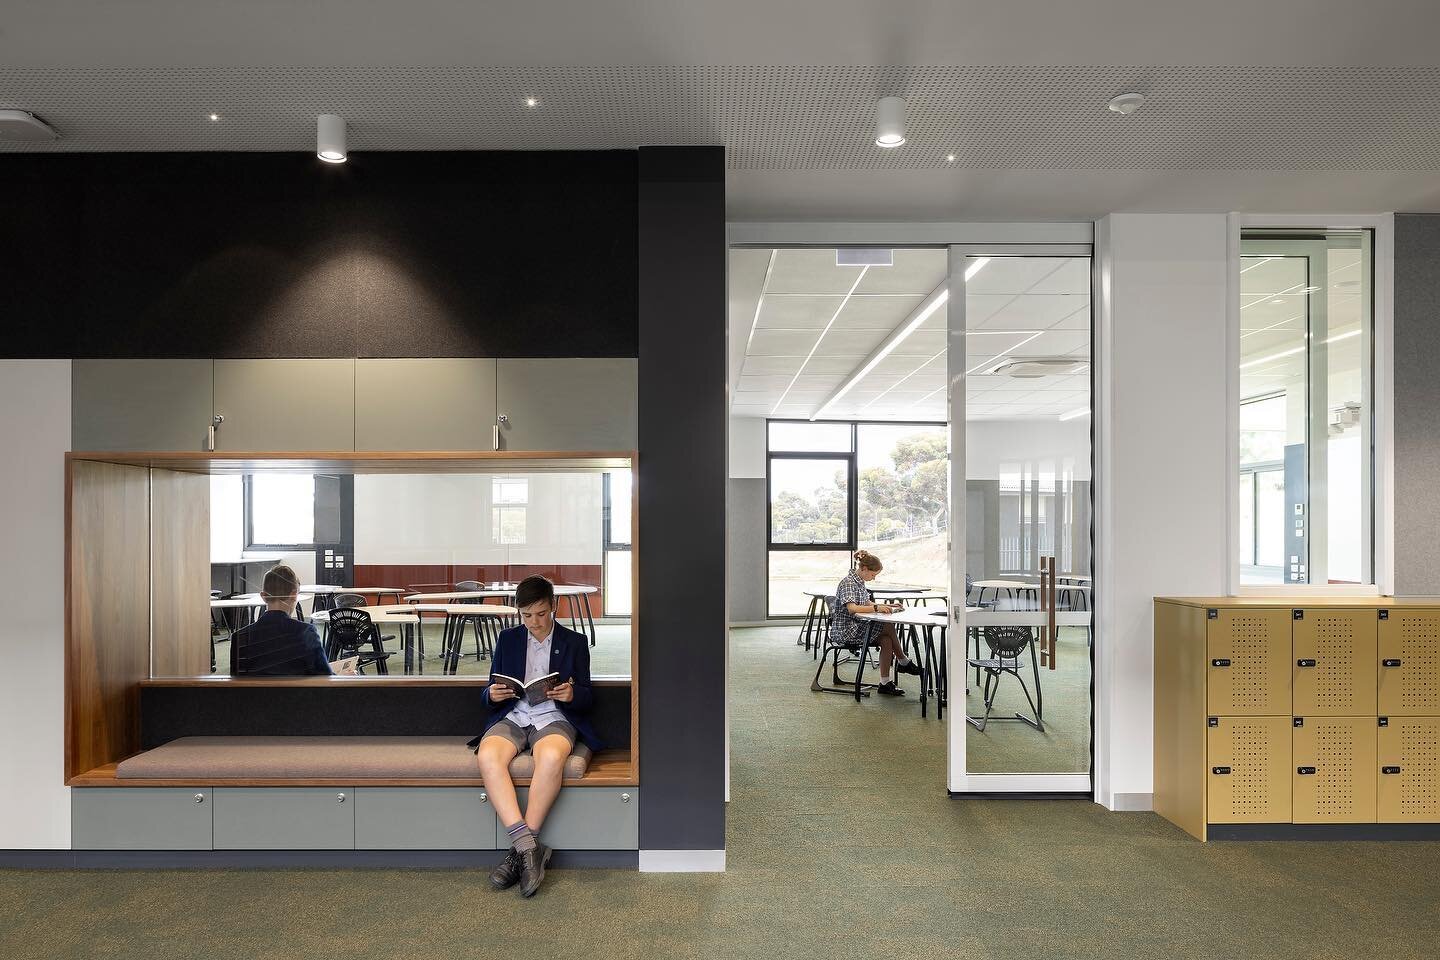 Winner for the 2022 Learning Environments Australasia (LEA) Award for New Educational Facility Over $8 Million! 

Beautifully crafted middle school learning centre at the Overnewton Anglican Community College - Yirramboi Campus. Its flexible layout a